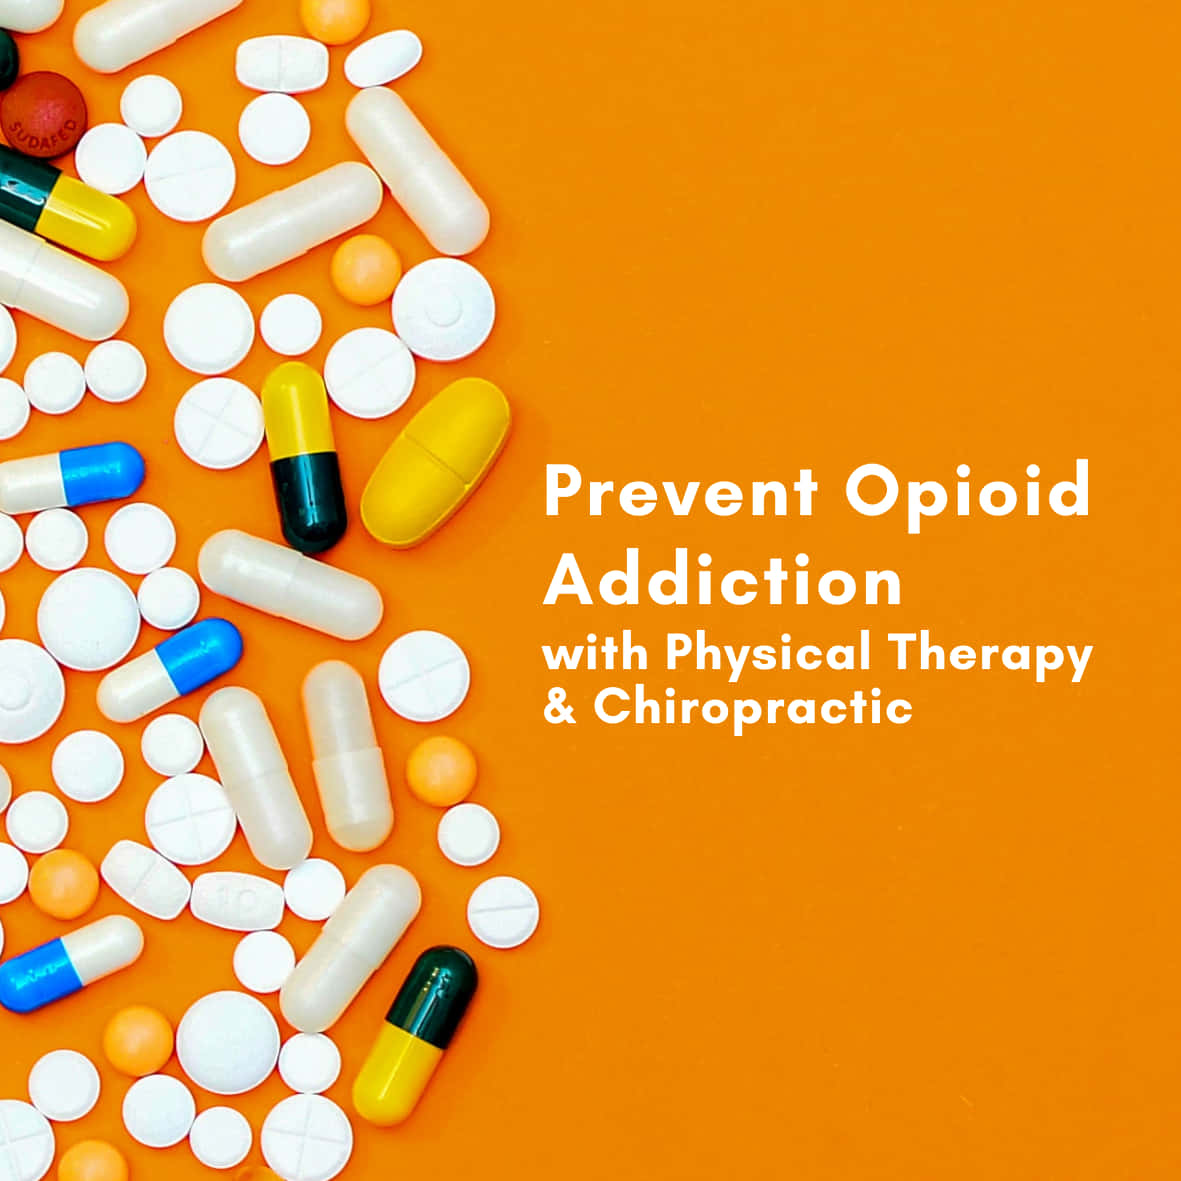 Physical Therapy Prevent Addiction Campaign Wallpaper